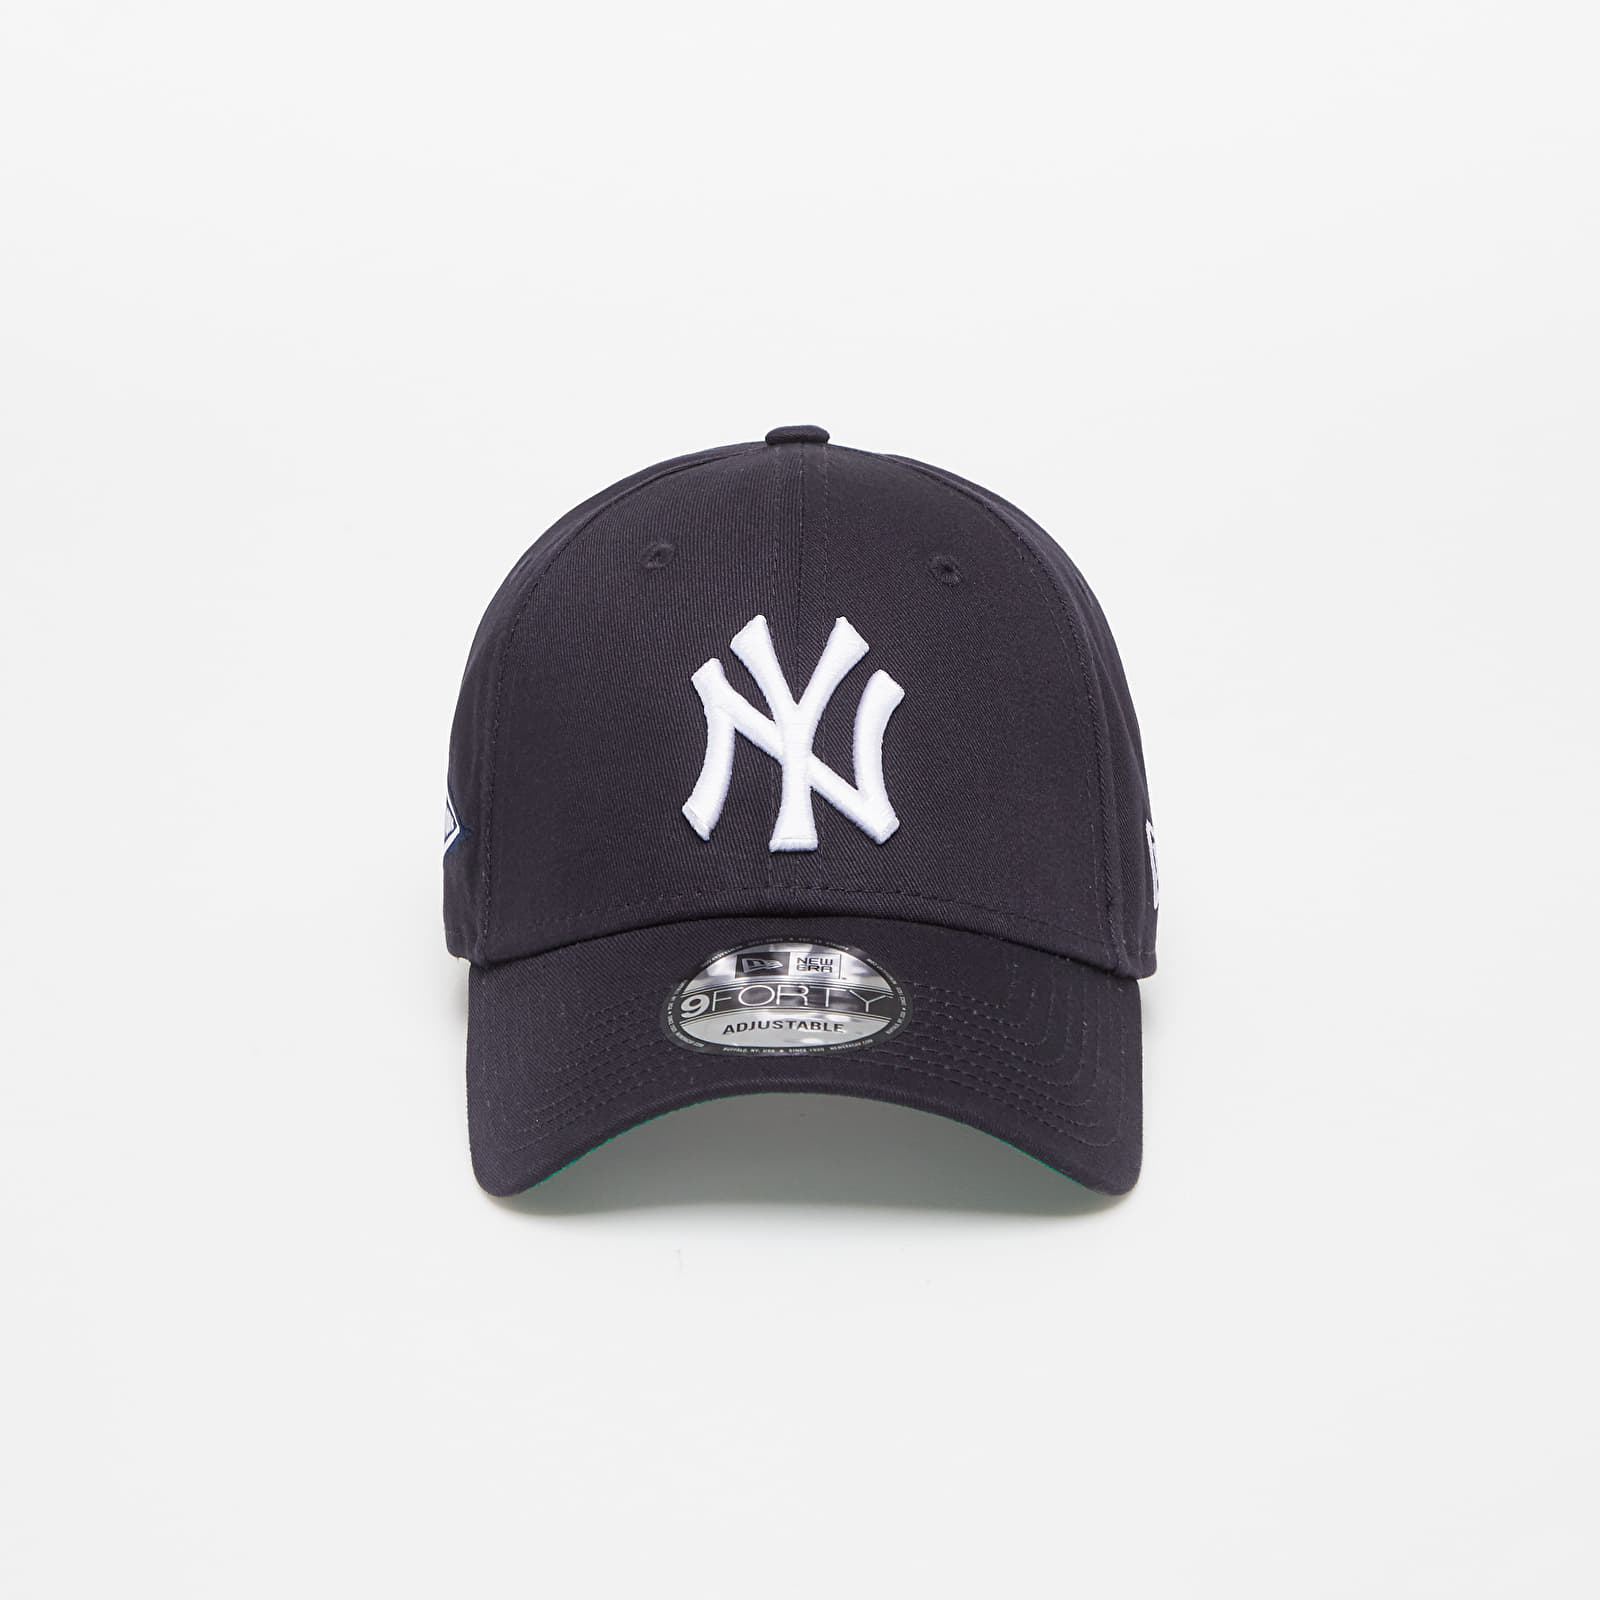 Șepci New Era New York Yankees Team Side Patch 9FORTY Adjustable Cap Navy